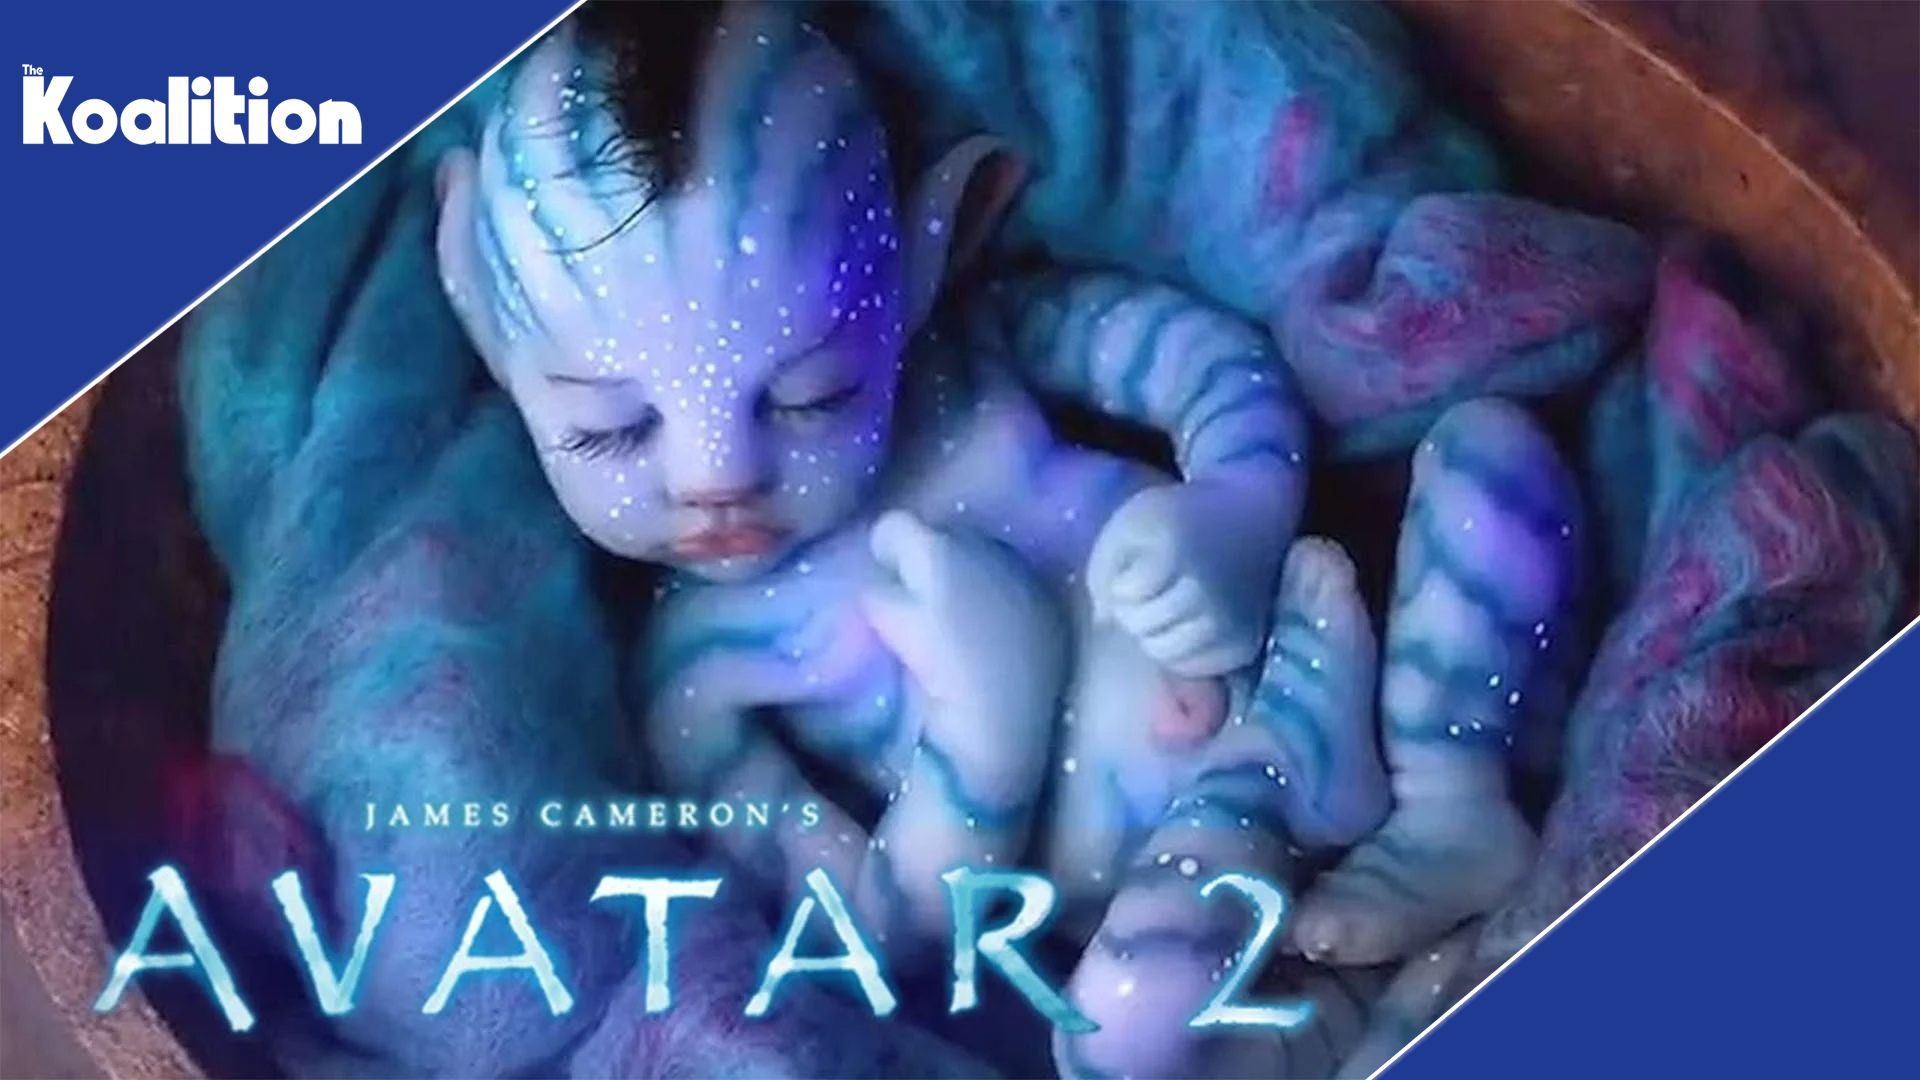 D23 – Avatar: The Way of Water Footage Description, The Higher Framerate Is Jarring – The Koalition